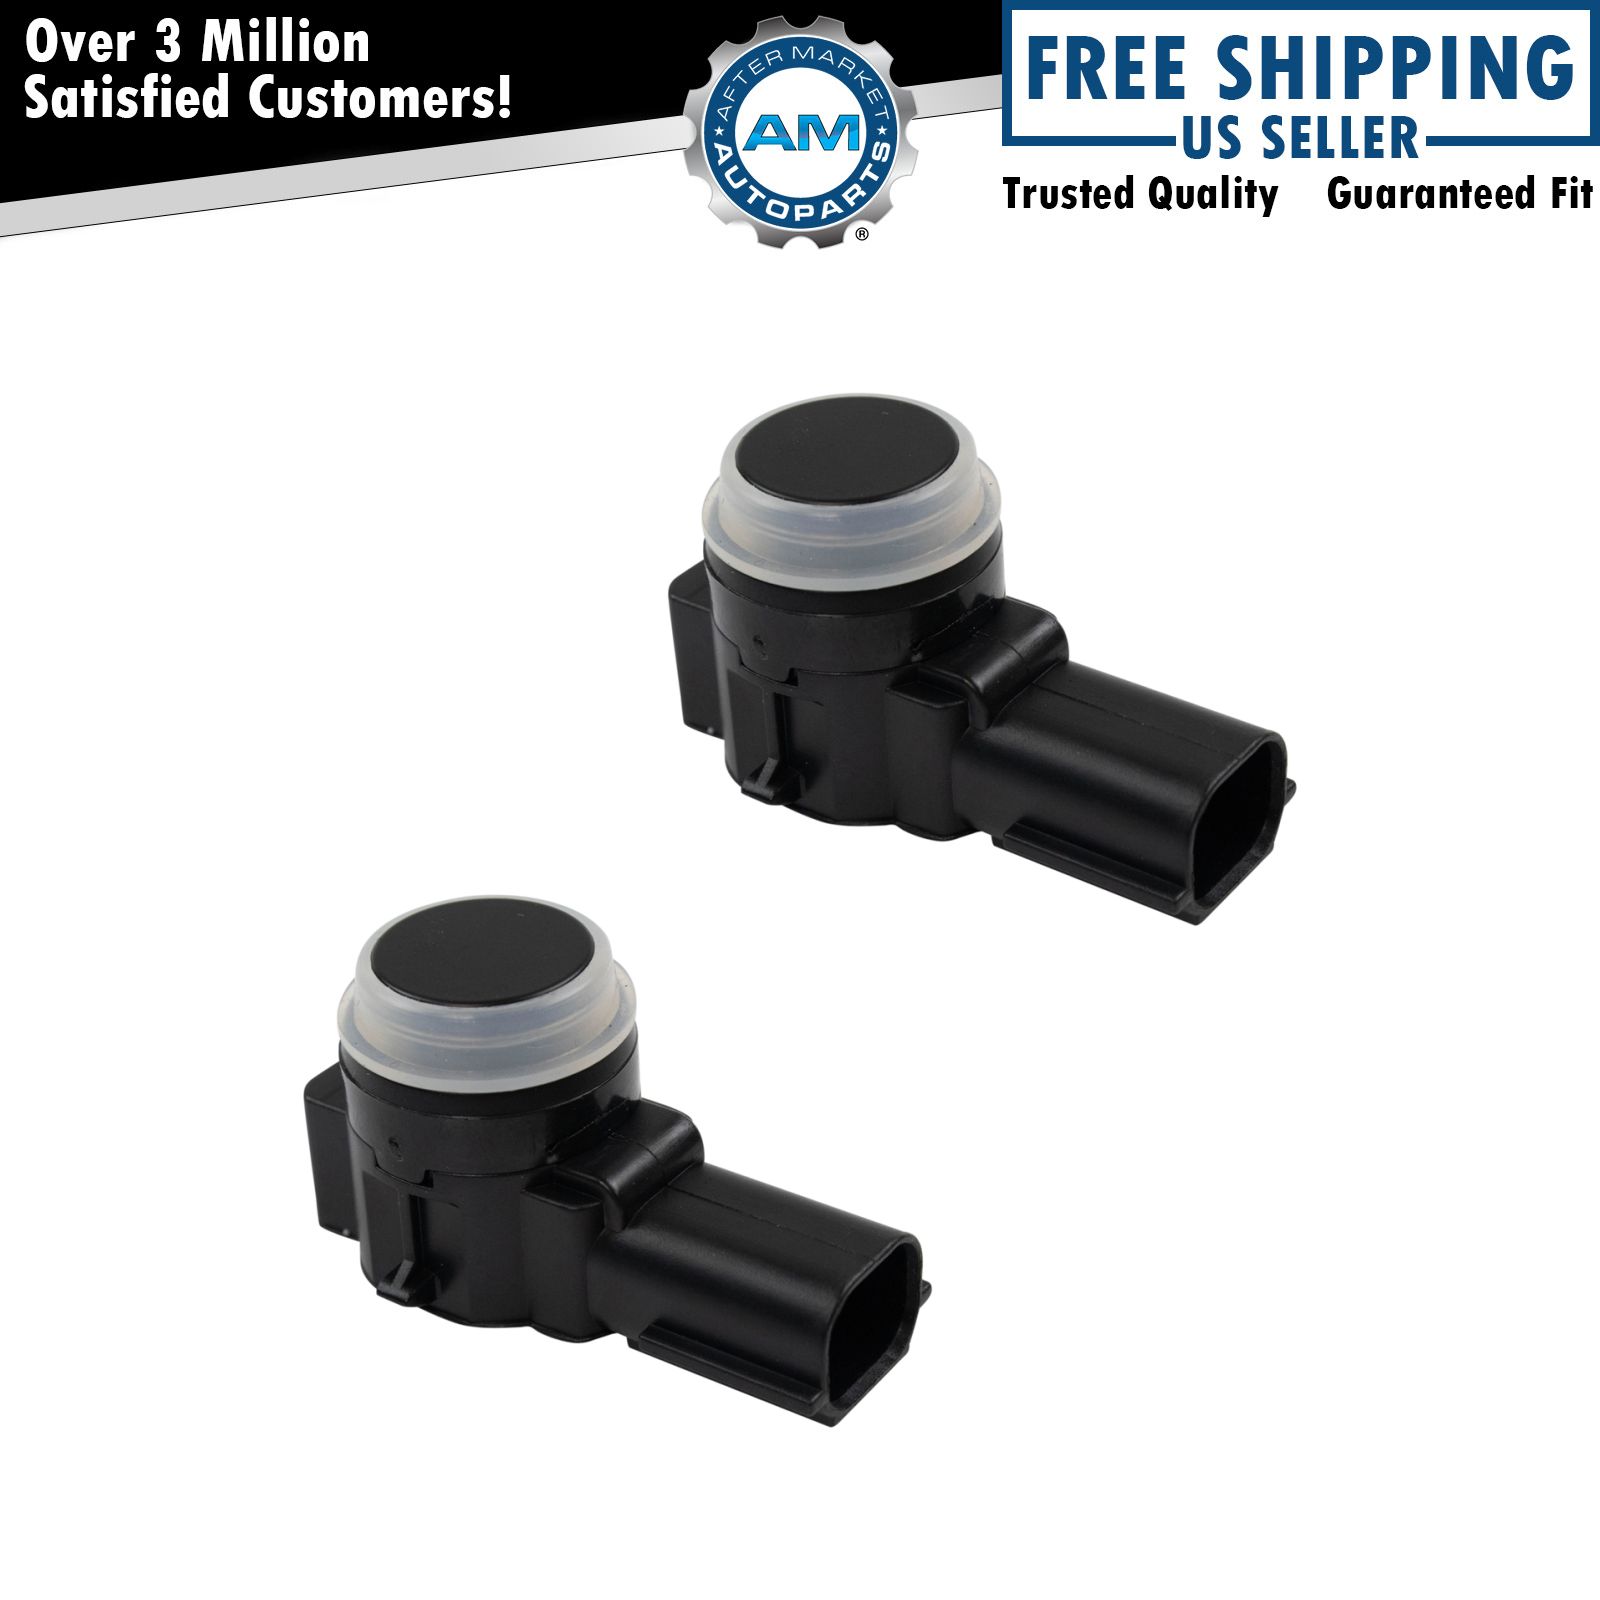 Bumper Parking Assist Object Sensor Pair Set for Buick Cadillac Chevy GMC New